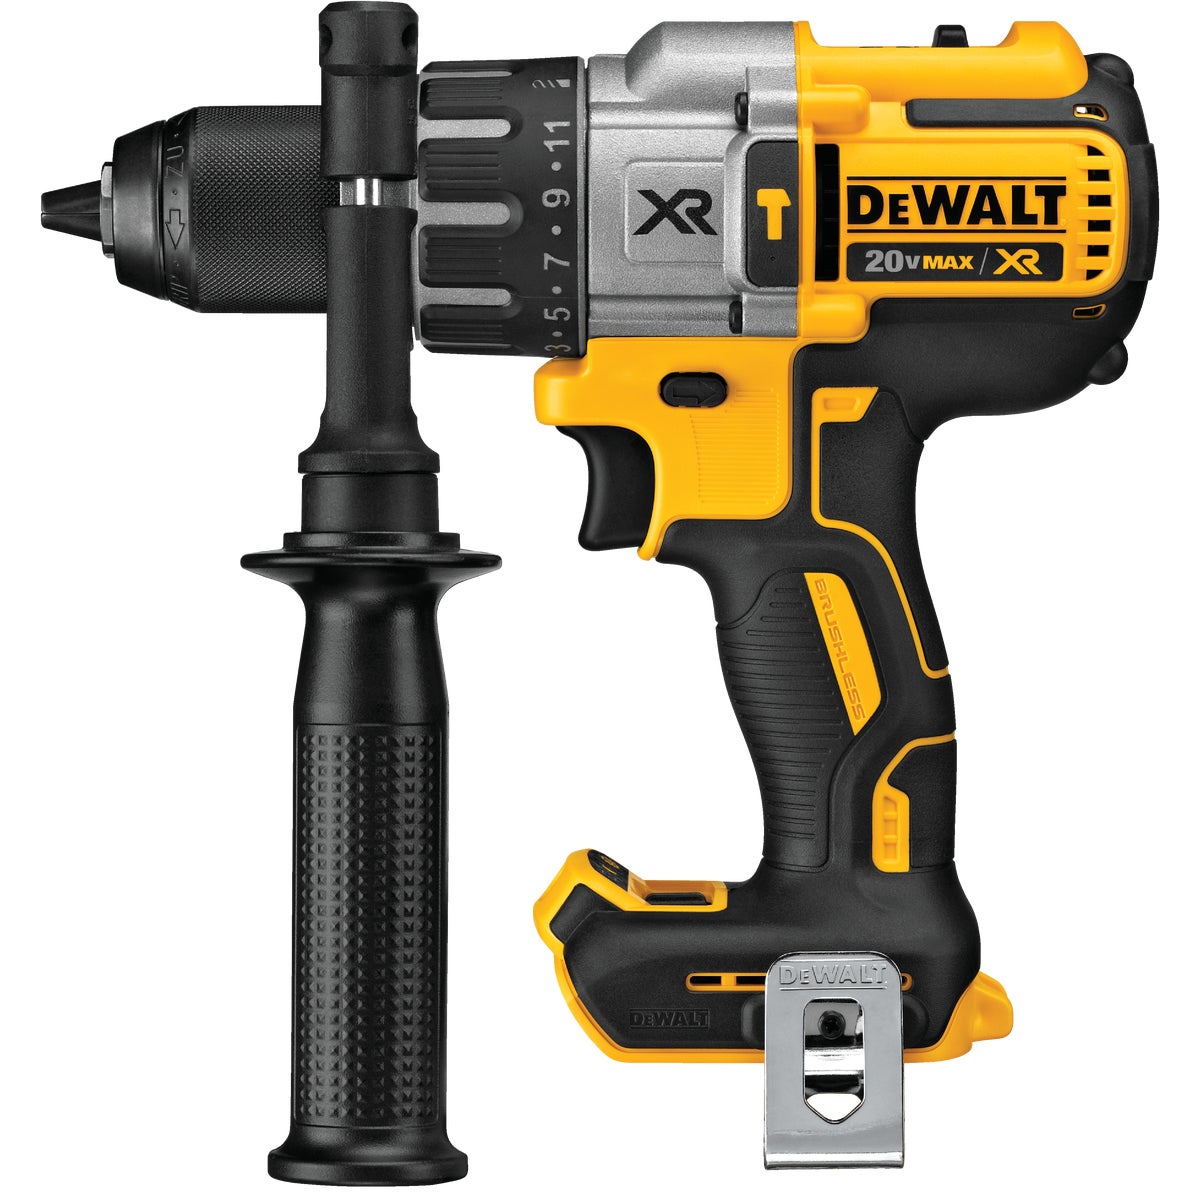 DEWALT 20-Volt MAX XR Lithium-Ion Brushless 1/2 In. 3-Speed Cordless Hammer Drill (Tool Only)